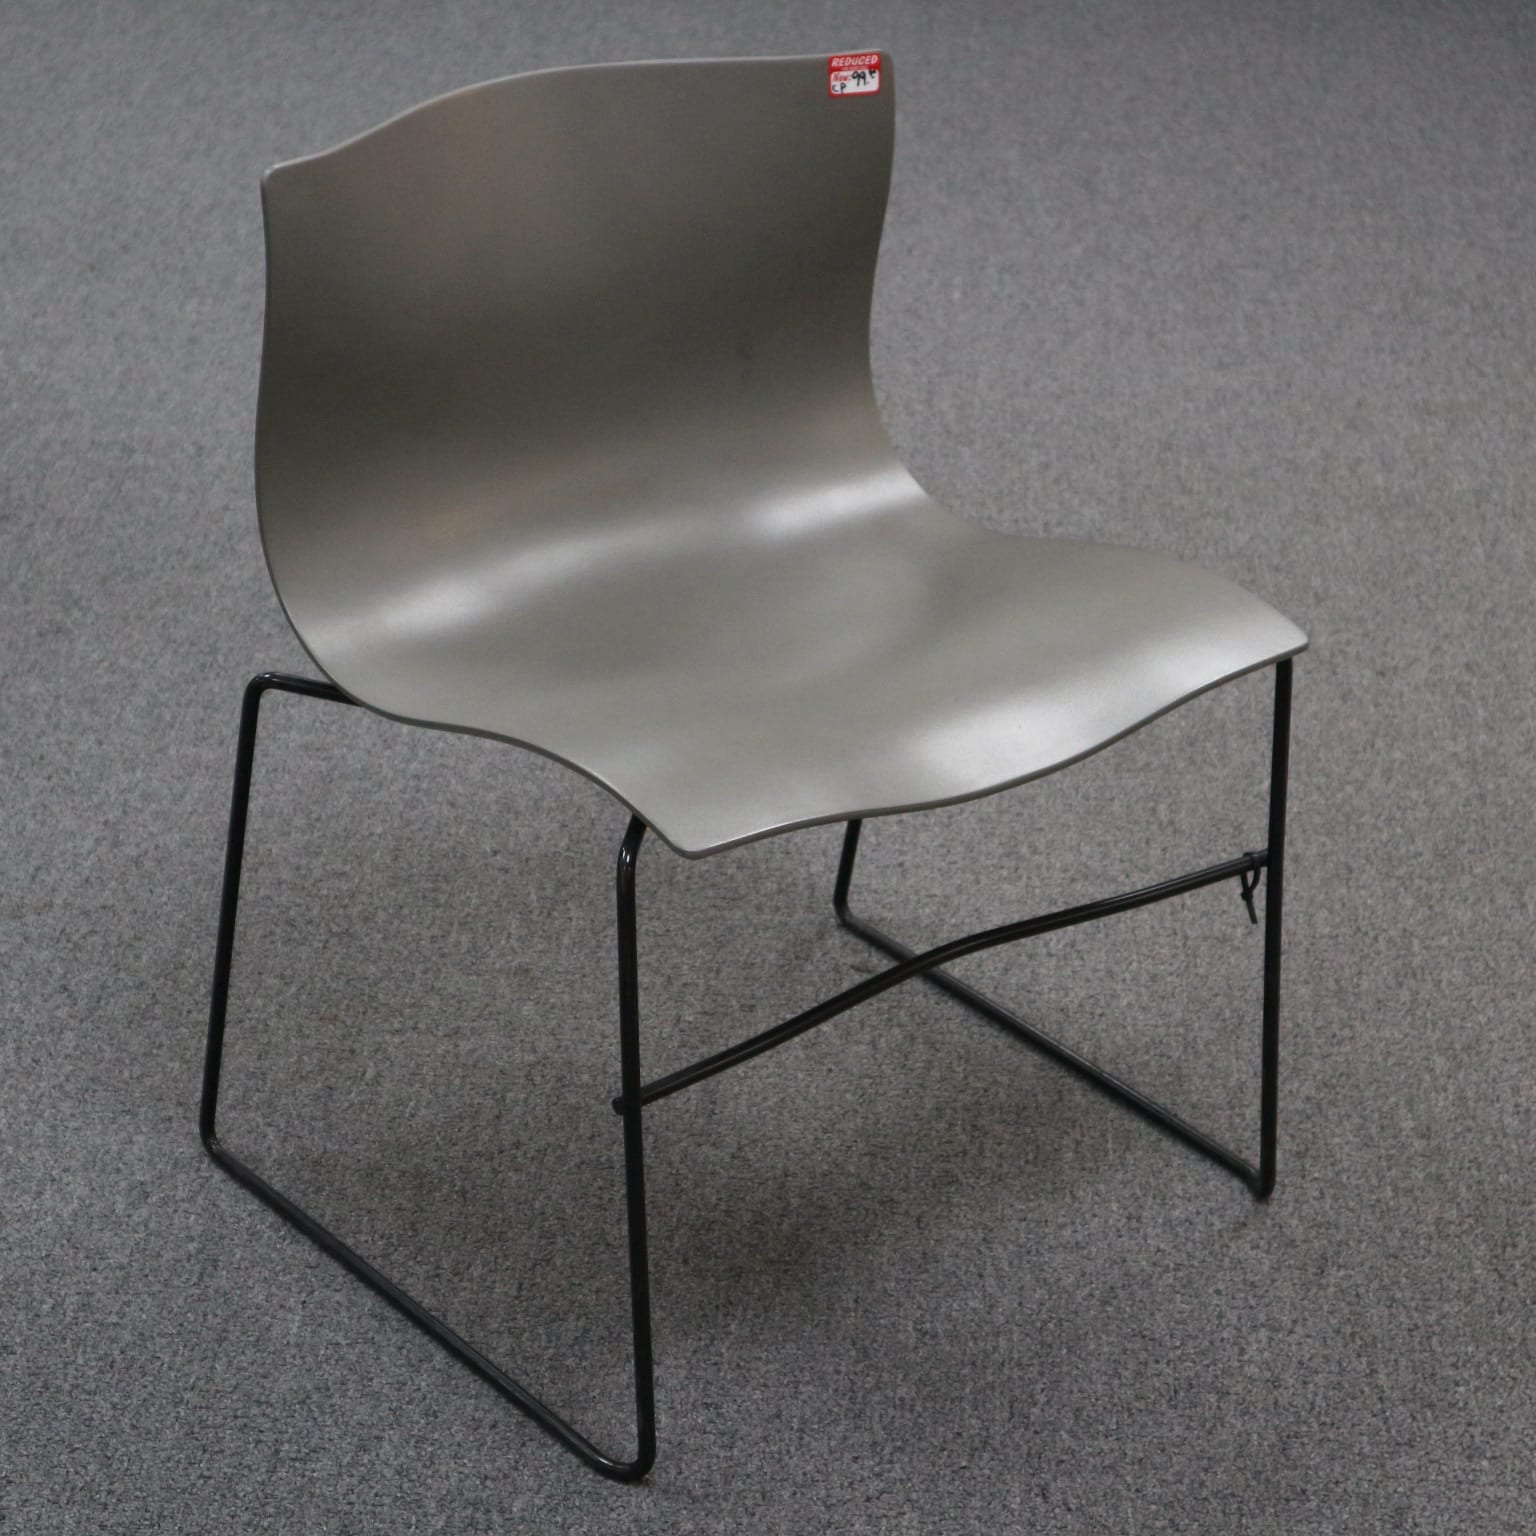 Handkerchief Chair in grey with black base